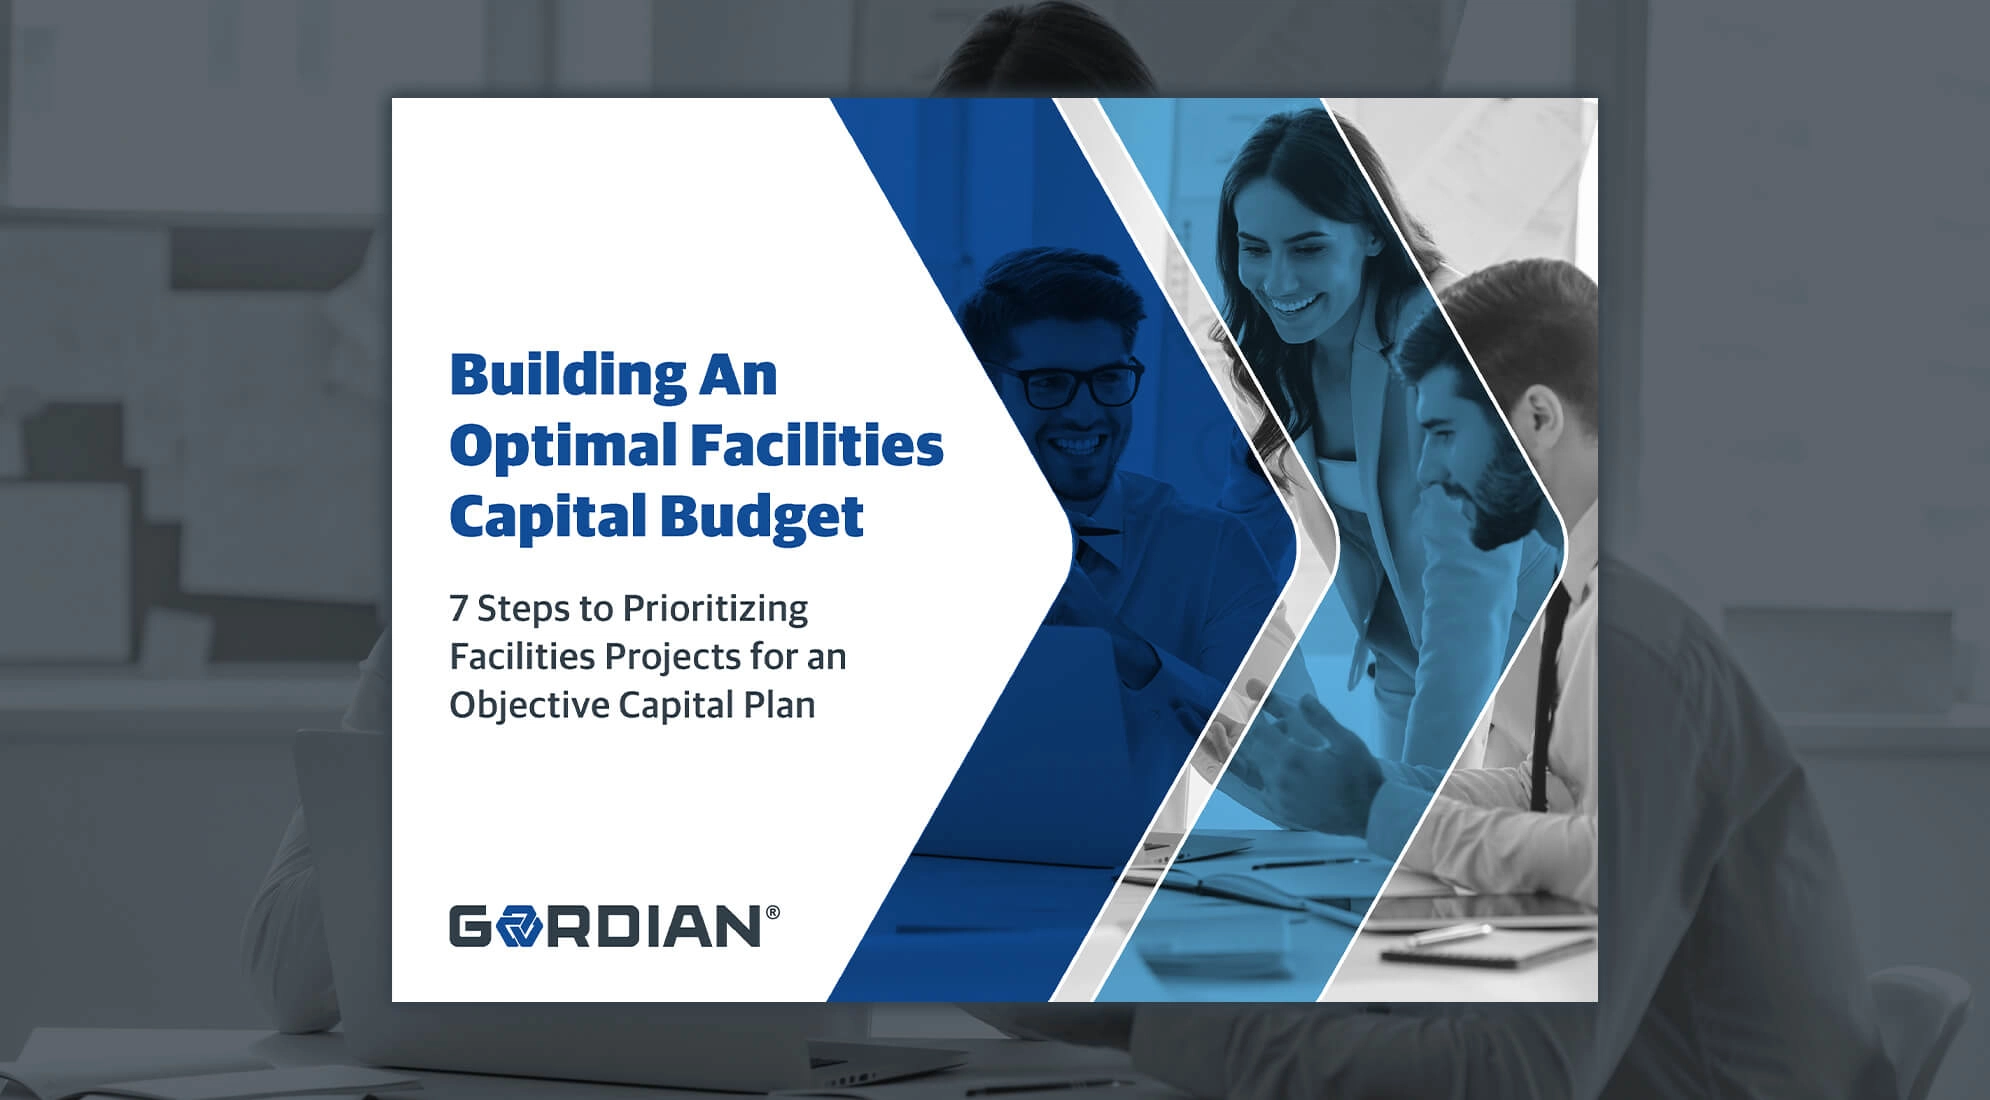 Building an Optimal Facilities Capital Budget: 7 Steps to Prioritizing Facilities Projects for an Objective Capital Plan 2